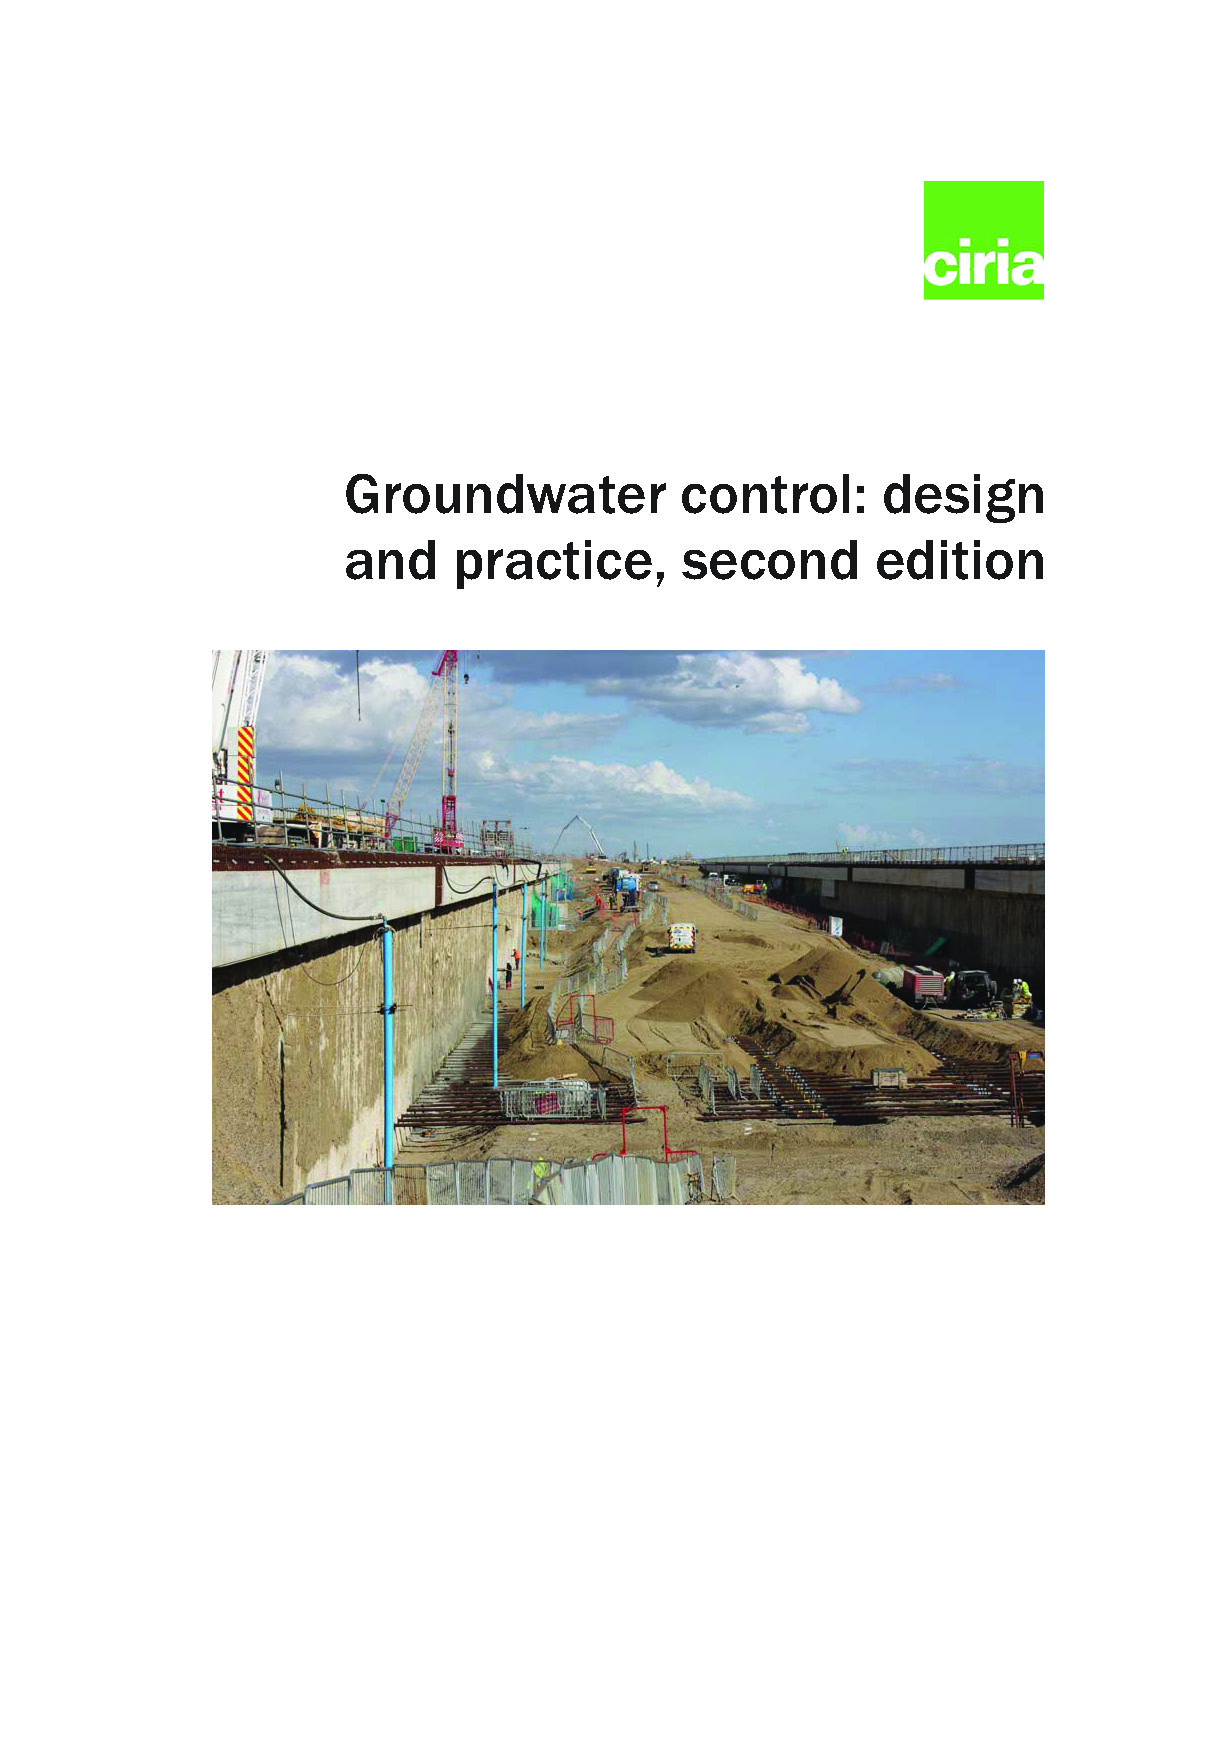 Groundwater control: design and practice (second edition)